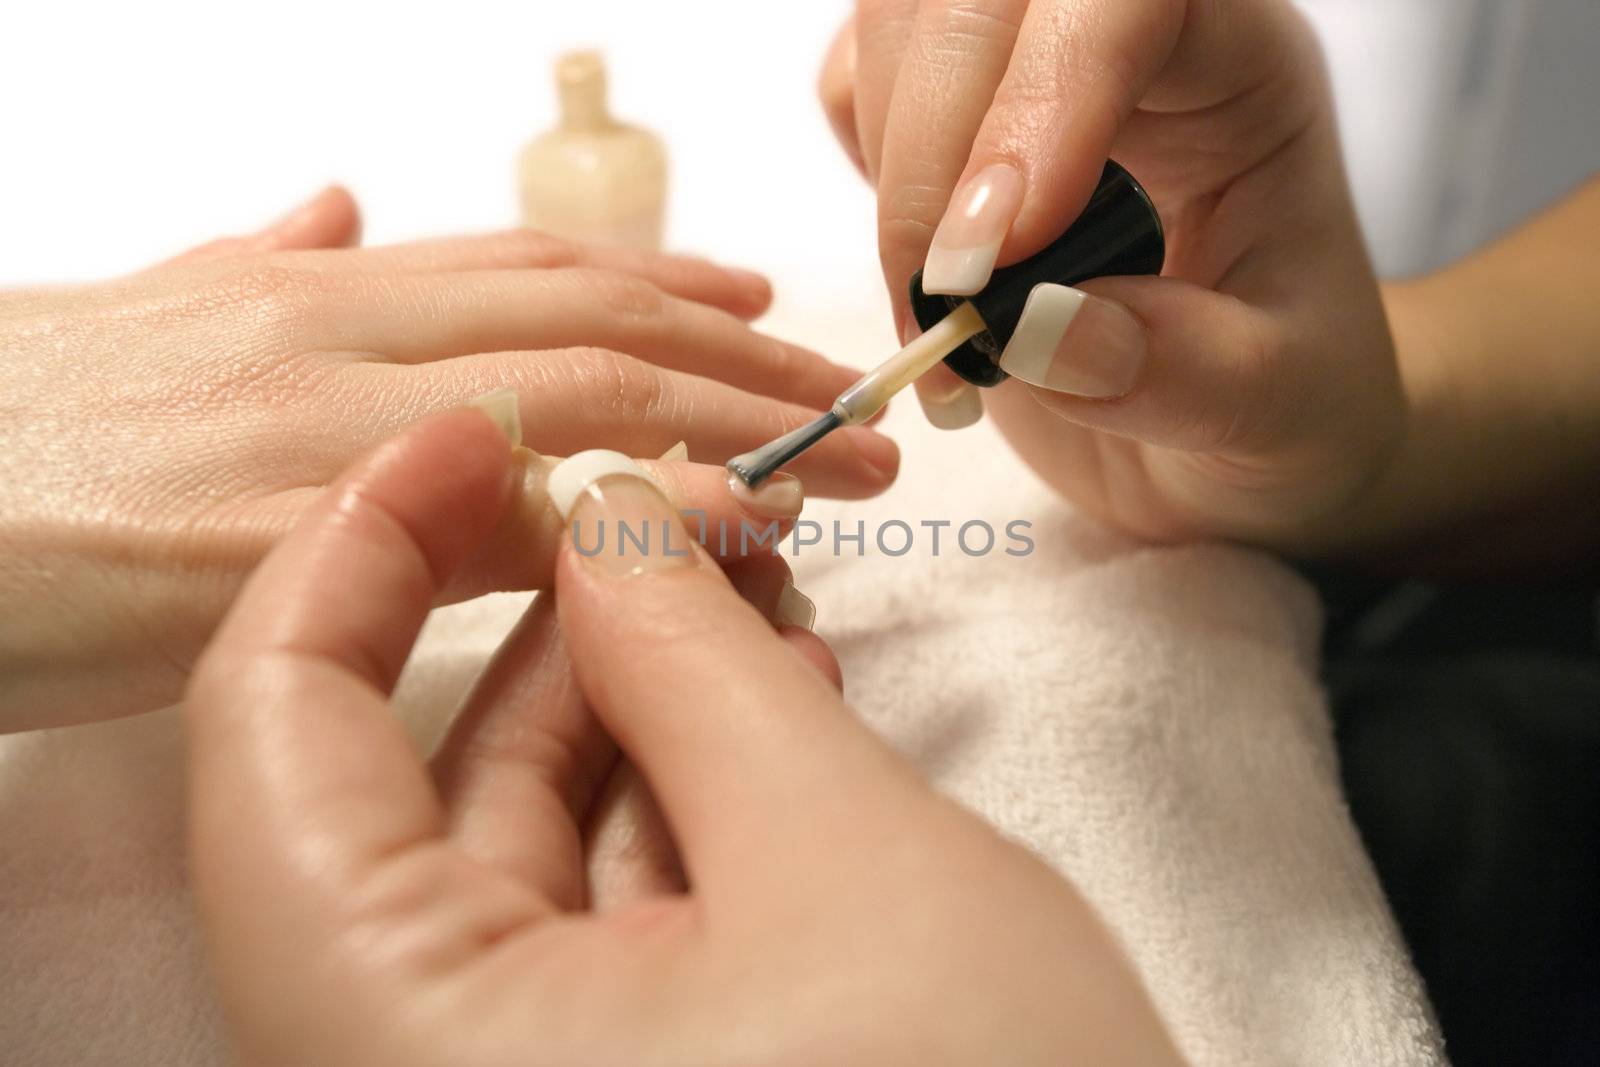 A manicurist applying nail polish during a manicure.
